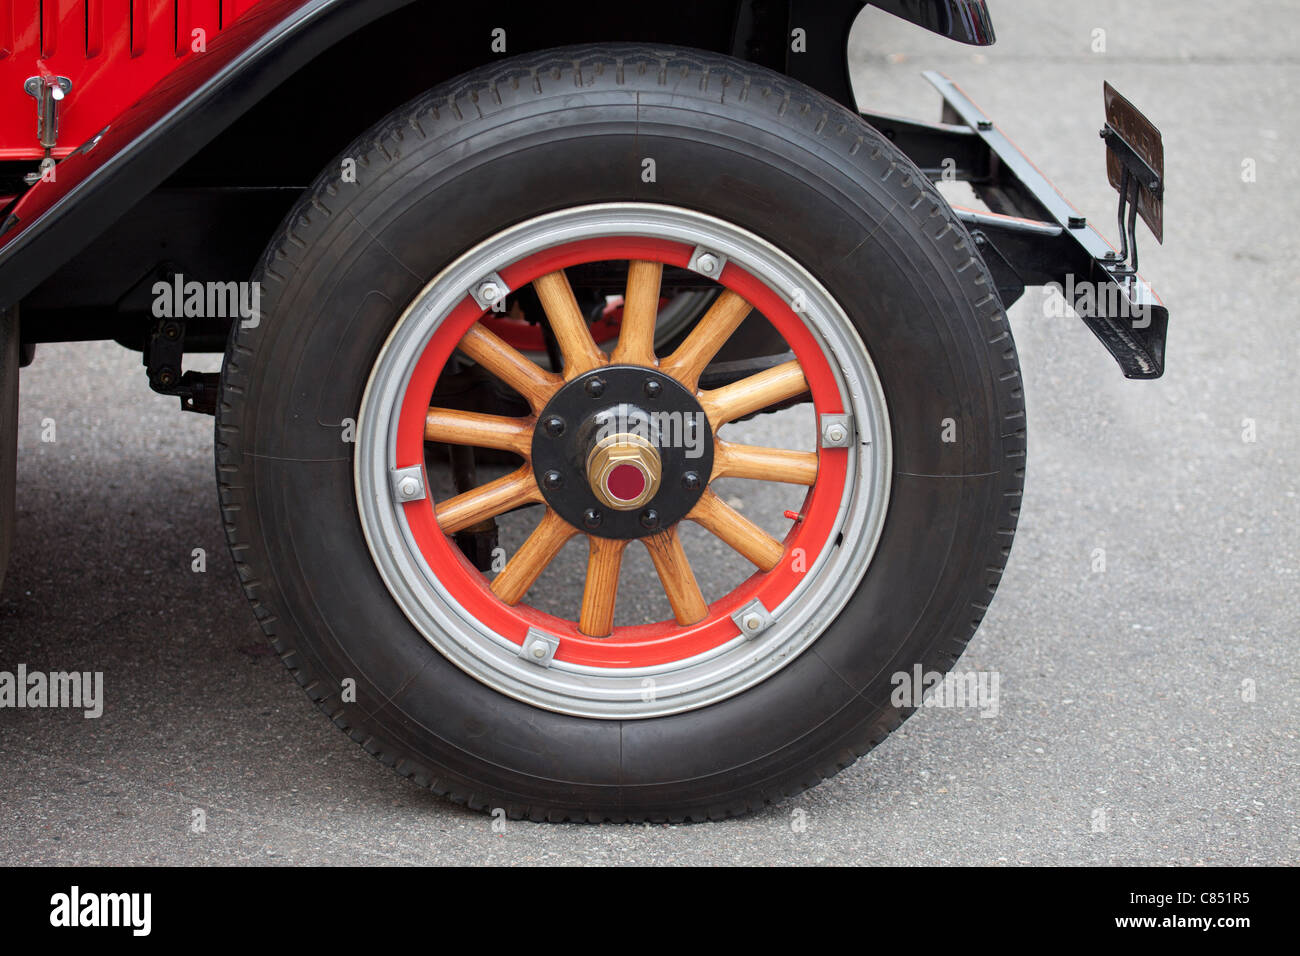 Old vintage fire engine. Wooden wheel detail Stock Photo